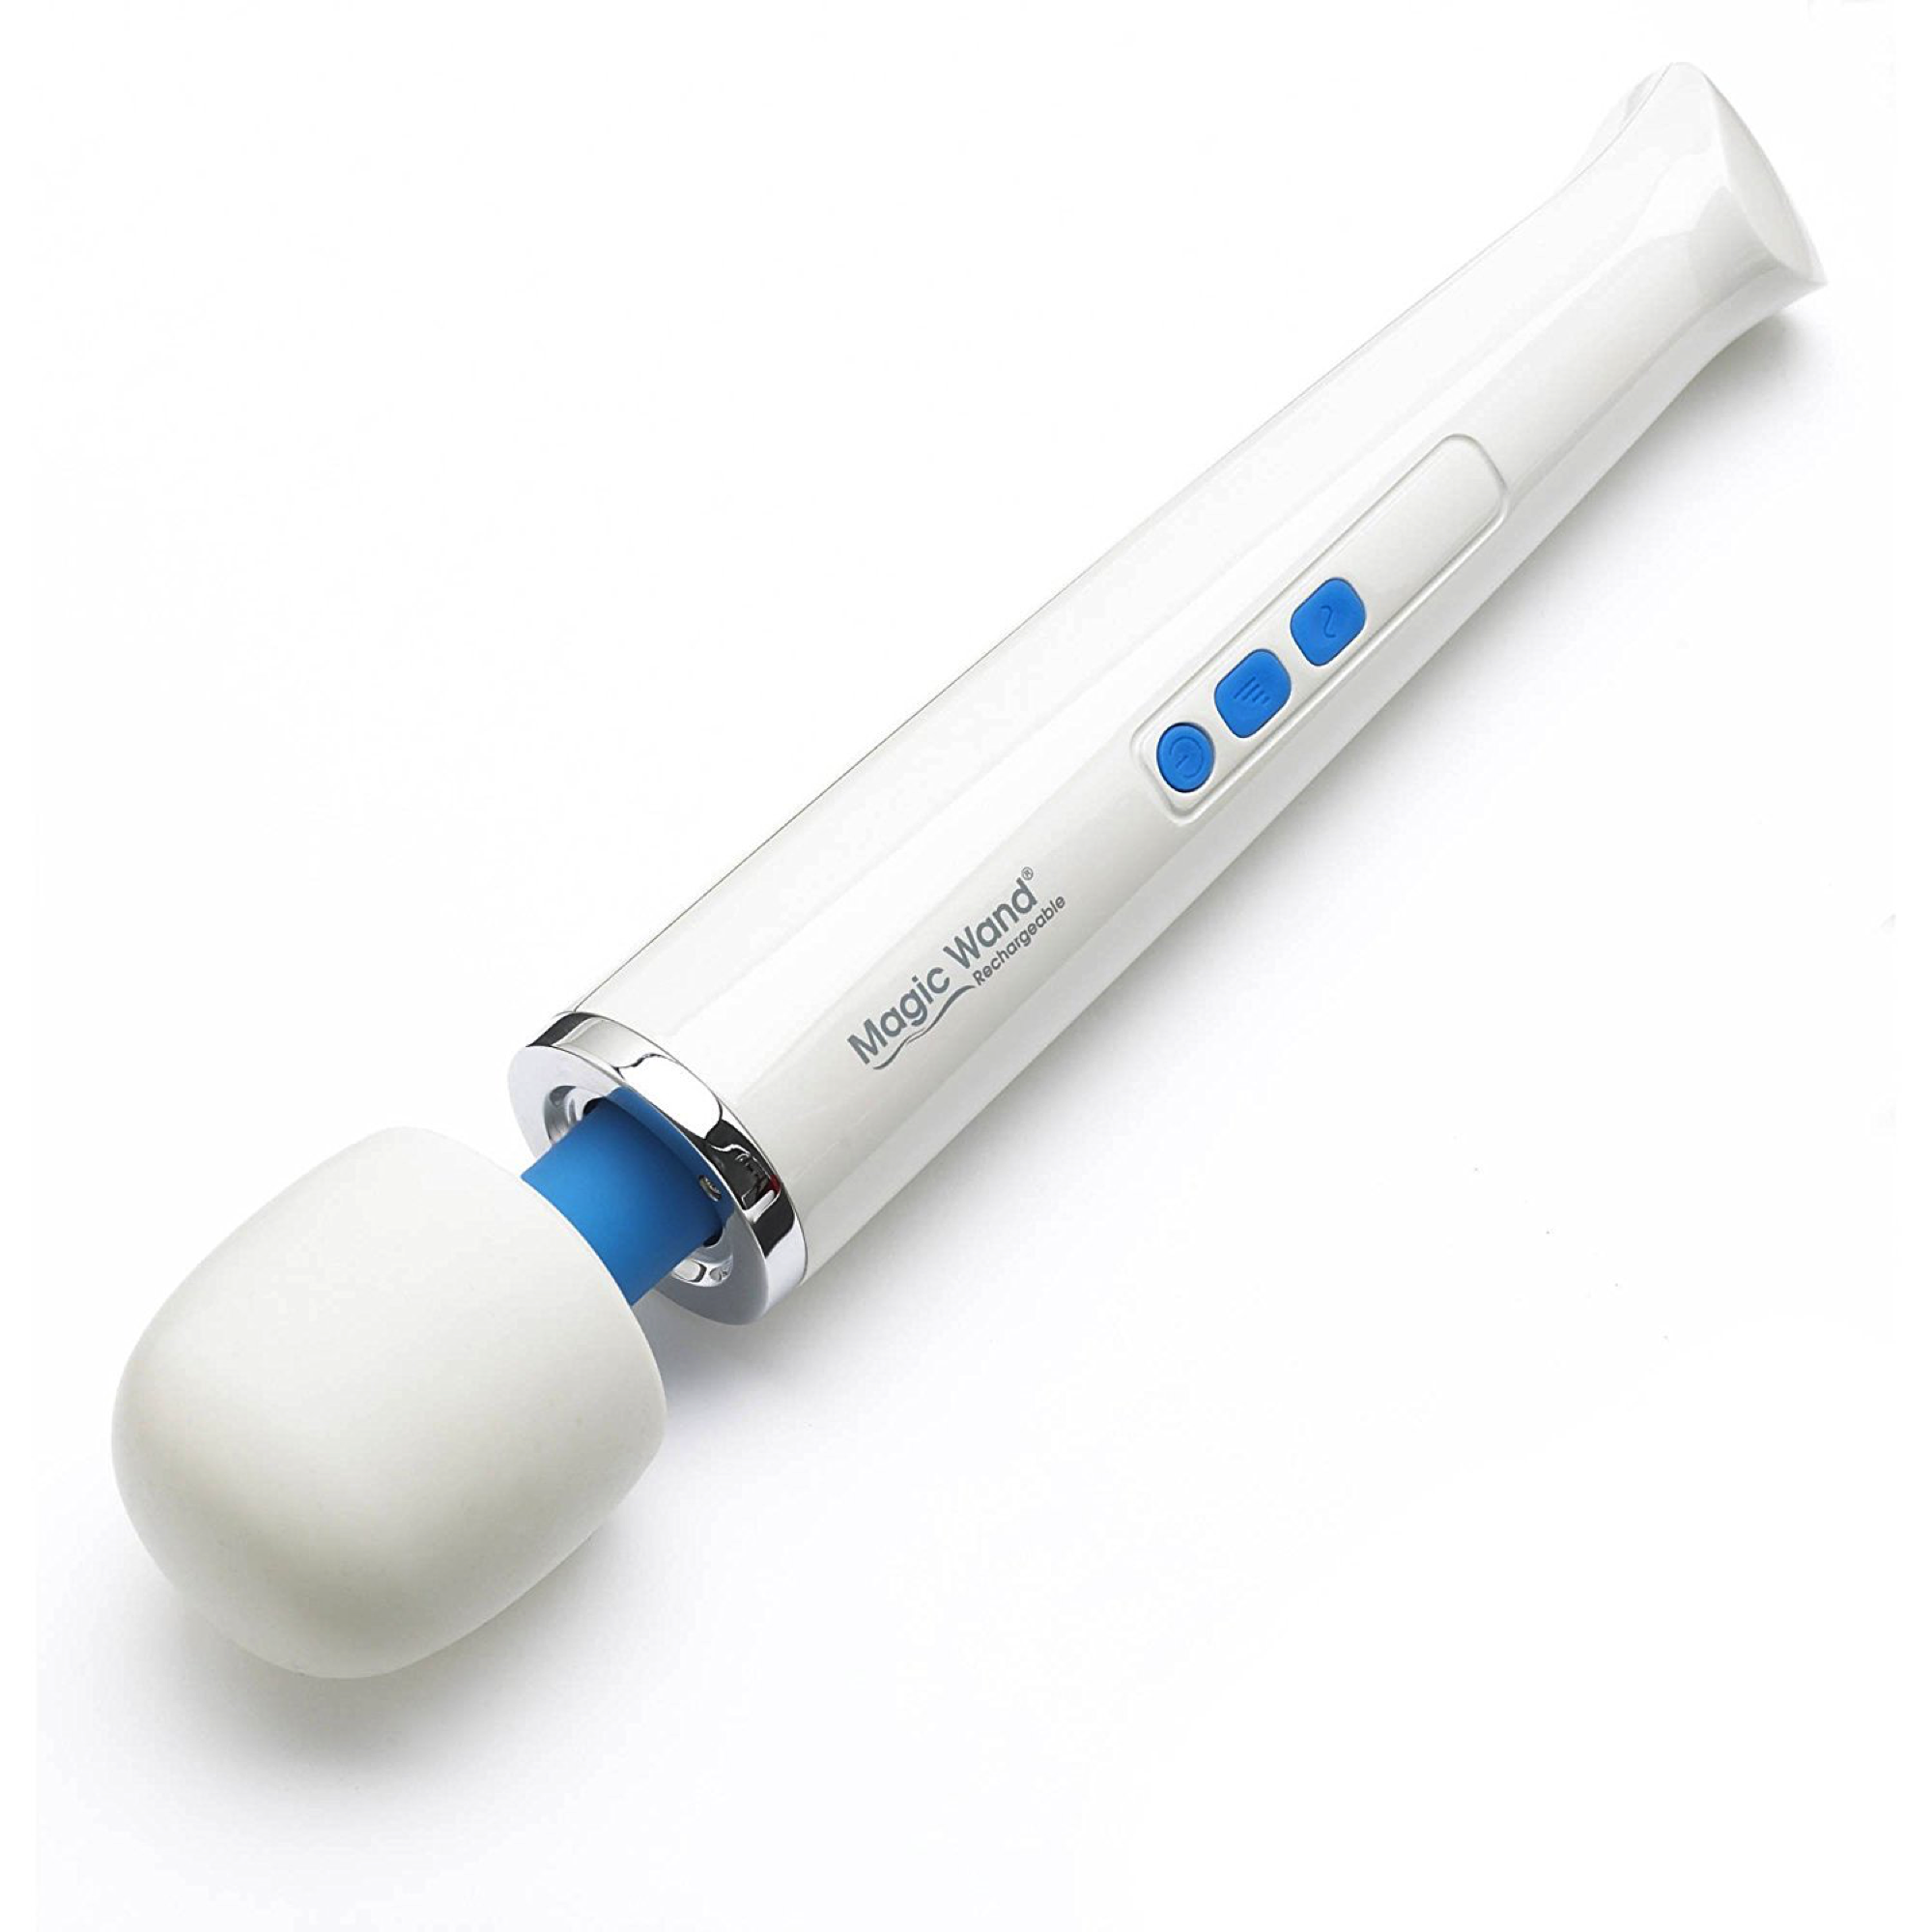 The Hitachi Magic Wand Rechargeable Review - Slutty Girl Problems